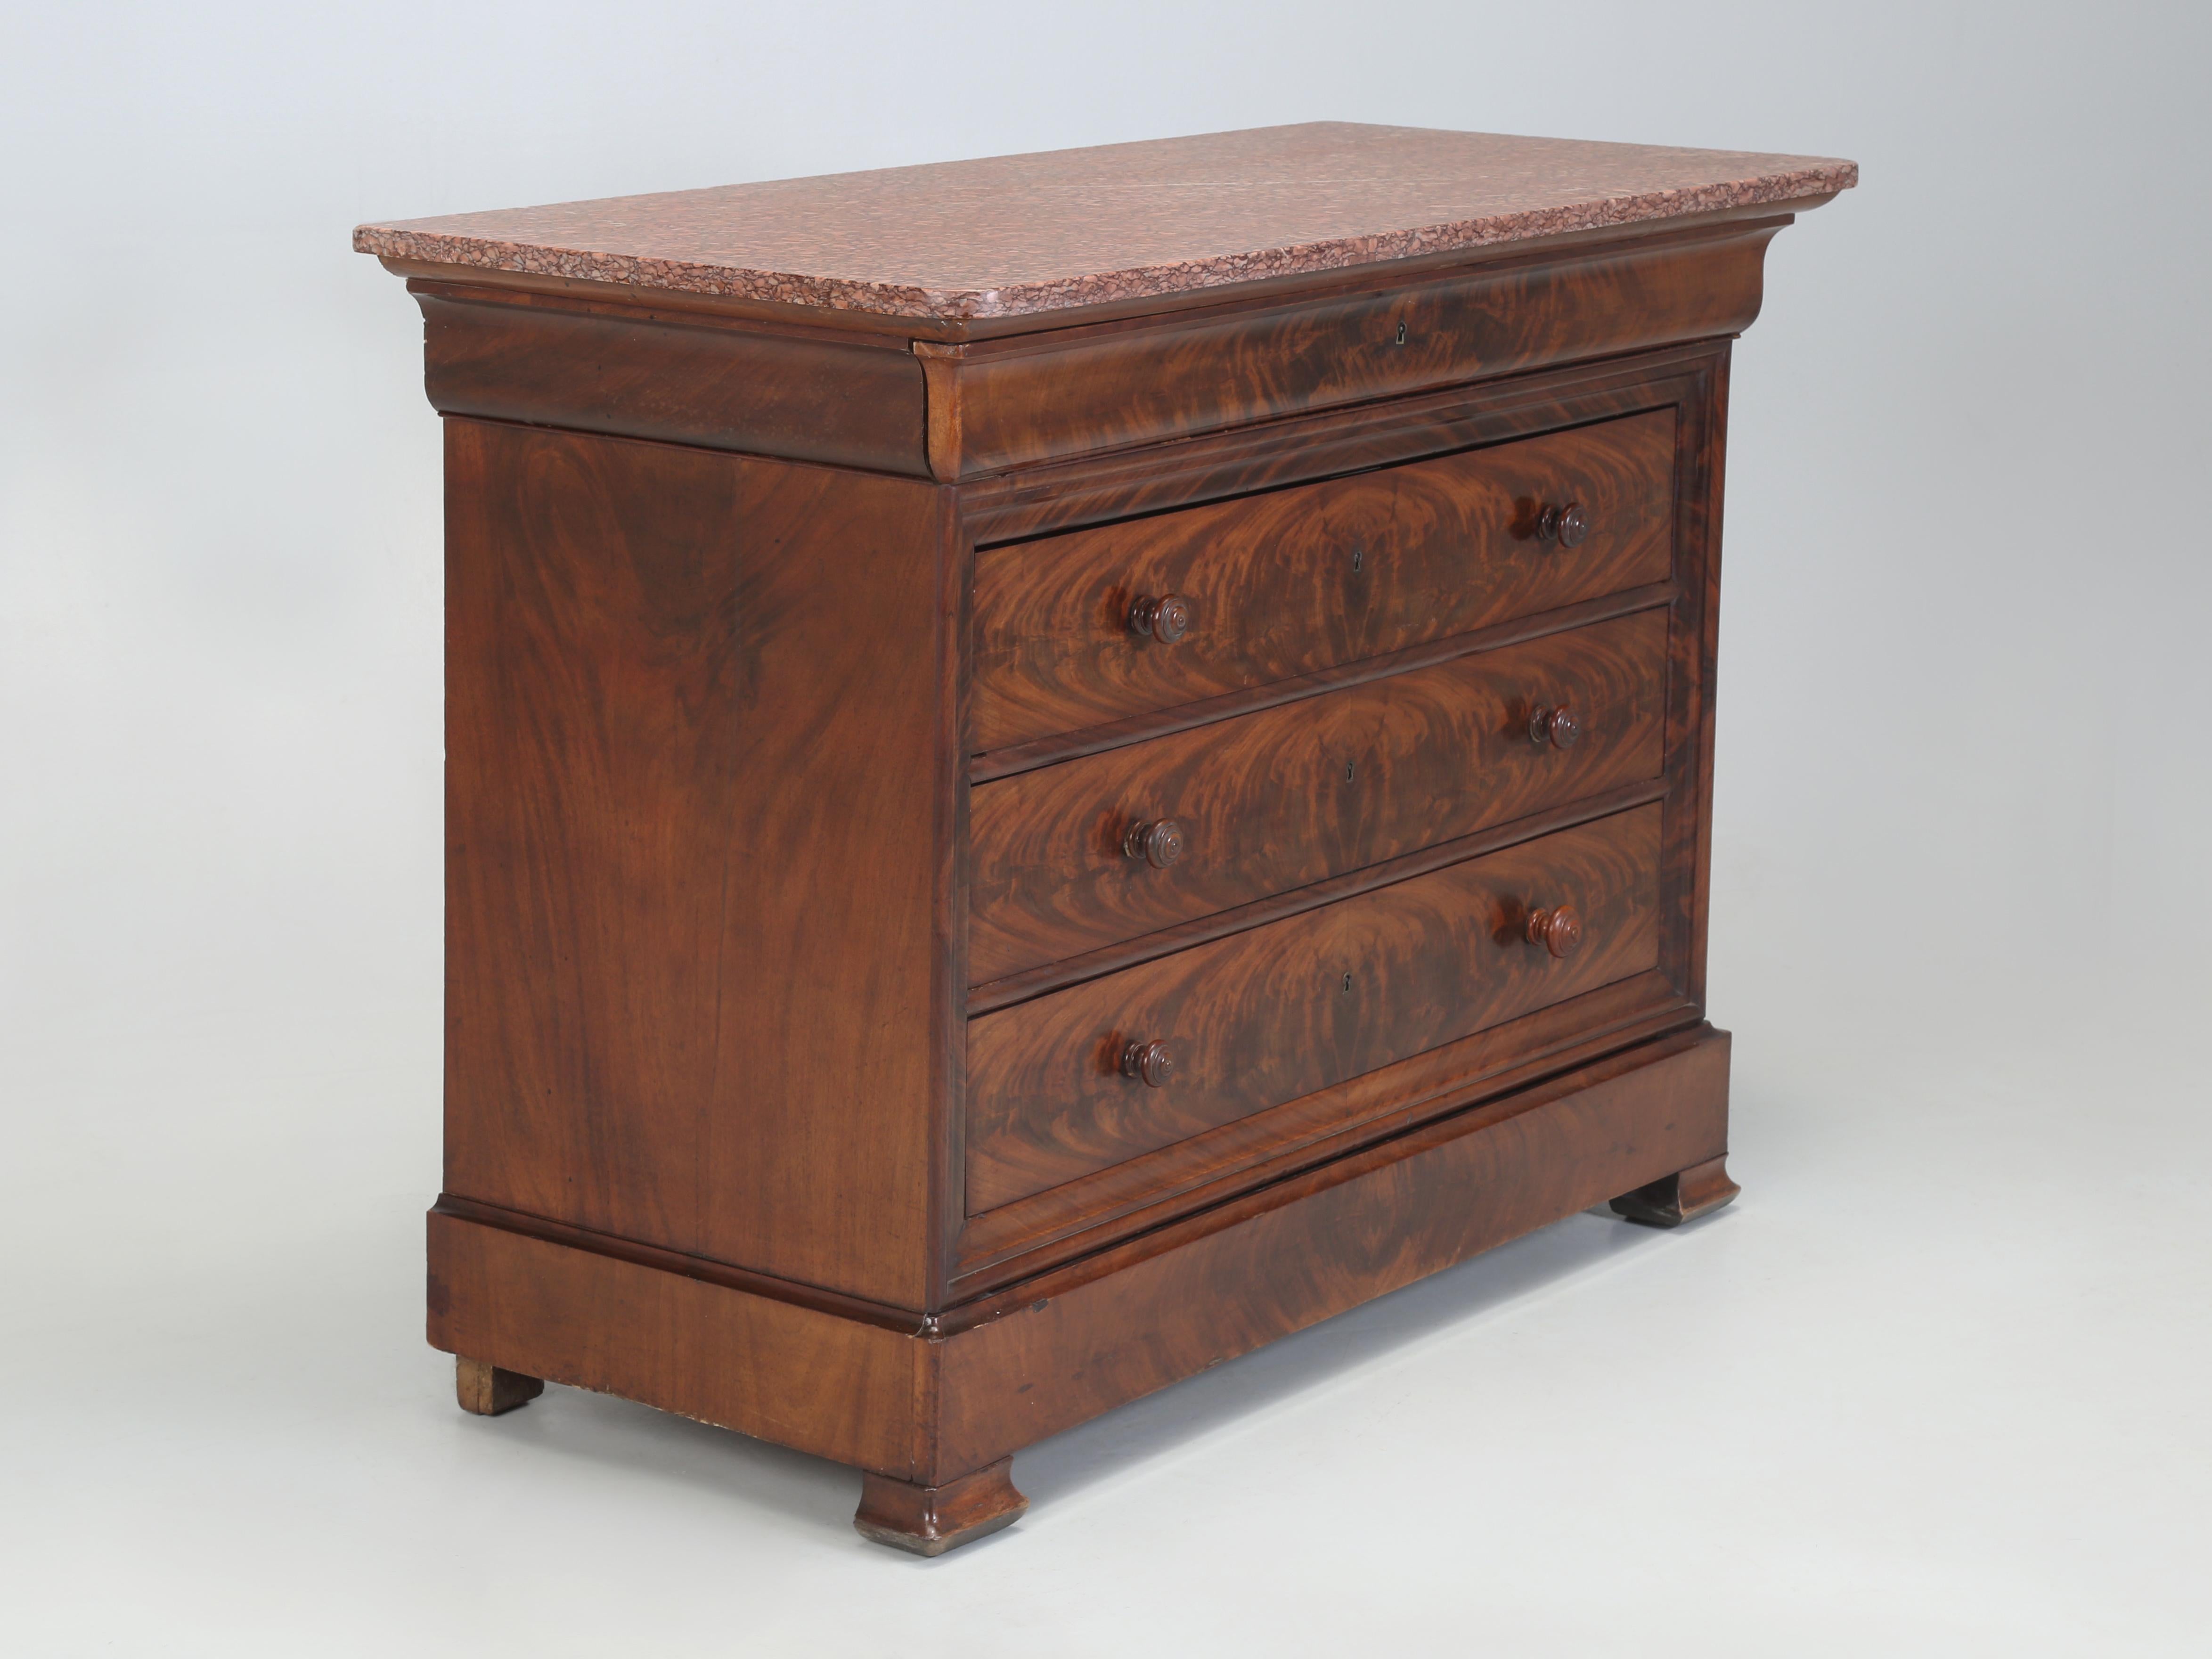 Antique French Louis Philippe Mahogany Commode with a Marble Top. The beautiful Crotch Mahogany has been carefully book-matched and appears to be all original. Our Old Plank Restoration Department went over the Antique French Chest of Drawers,